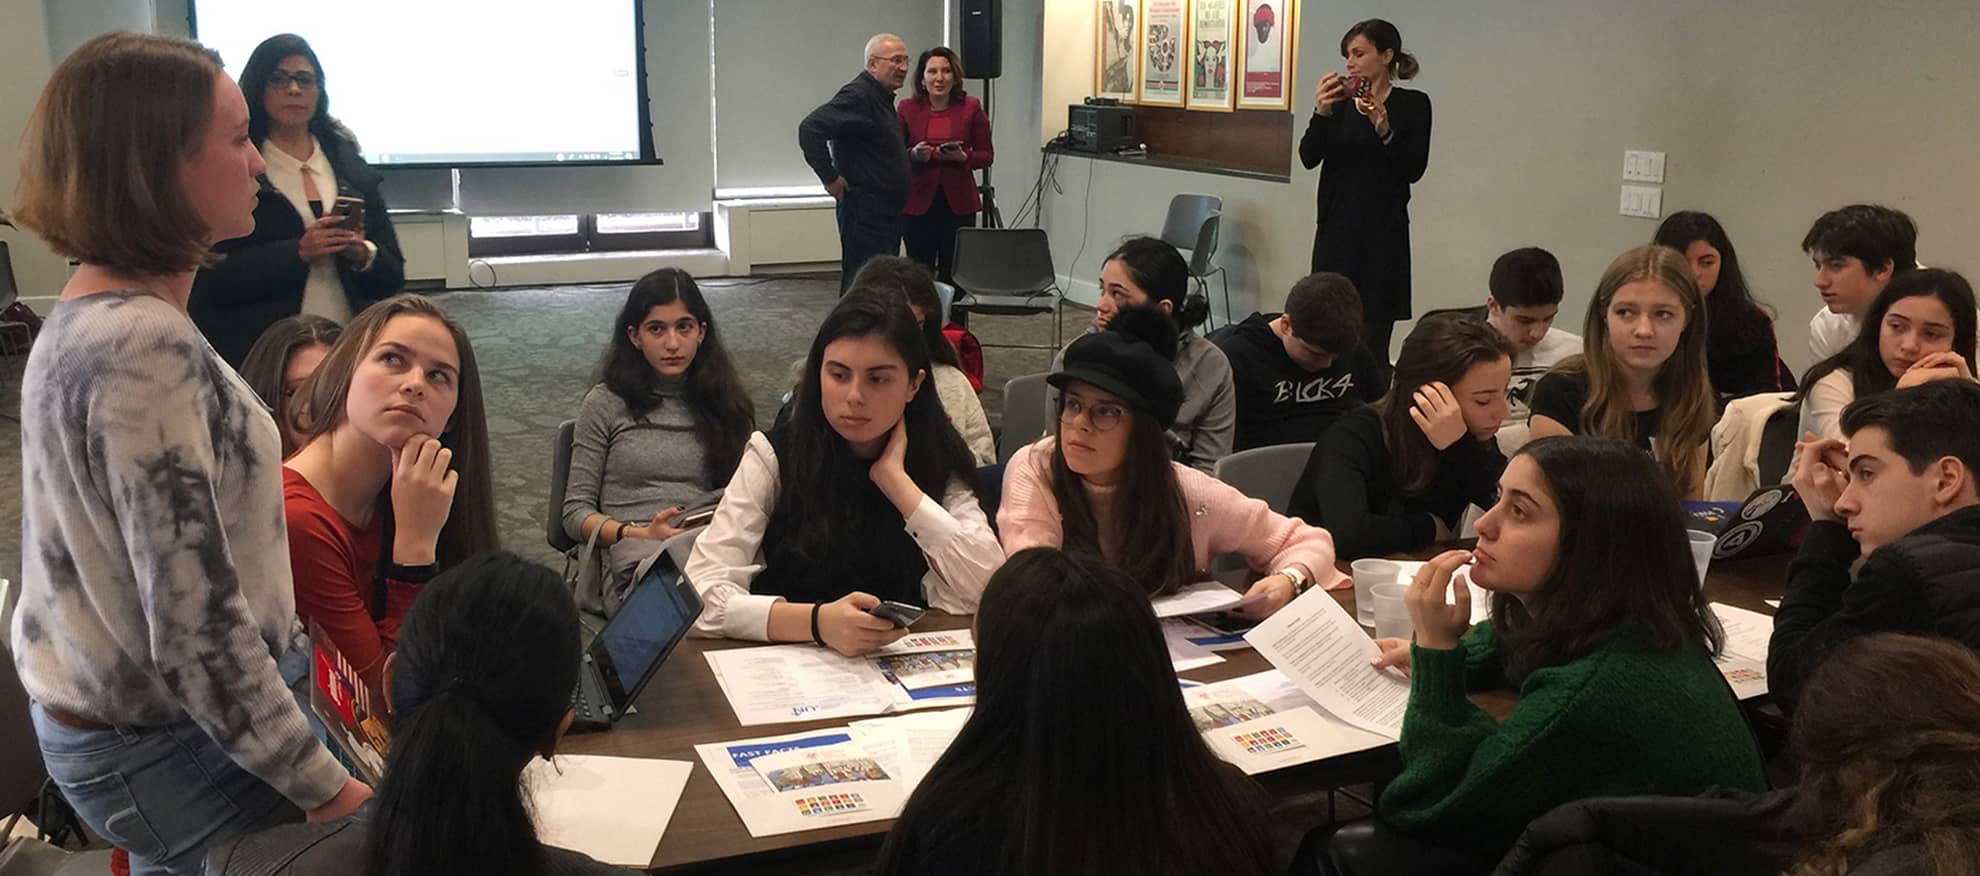 Lilian Oxley (standing) helps guide discussion among students from Mexico, the Republic of Georgia, New York and New Jersey on the subtheme: Science-based facts and predictions related to climate change. In the background are teachers from these schools, who are there to observe but not intervene.